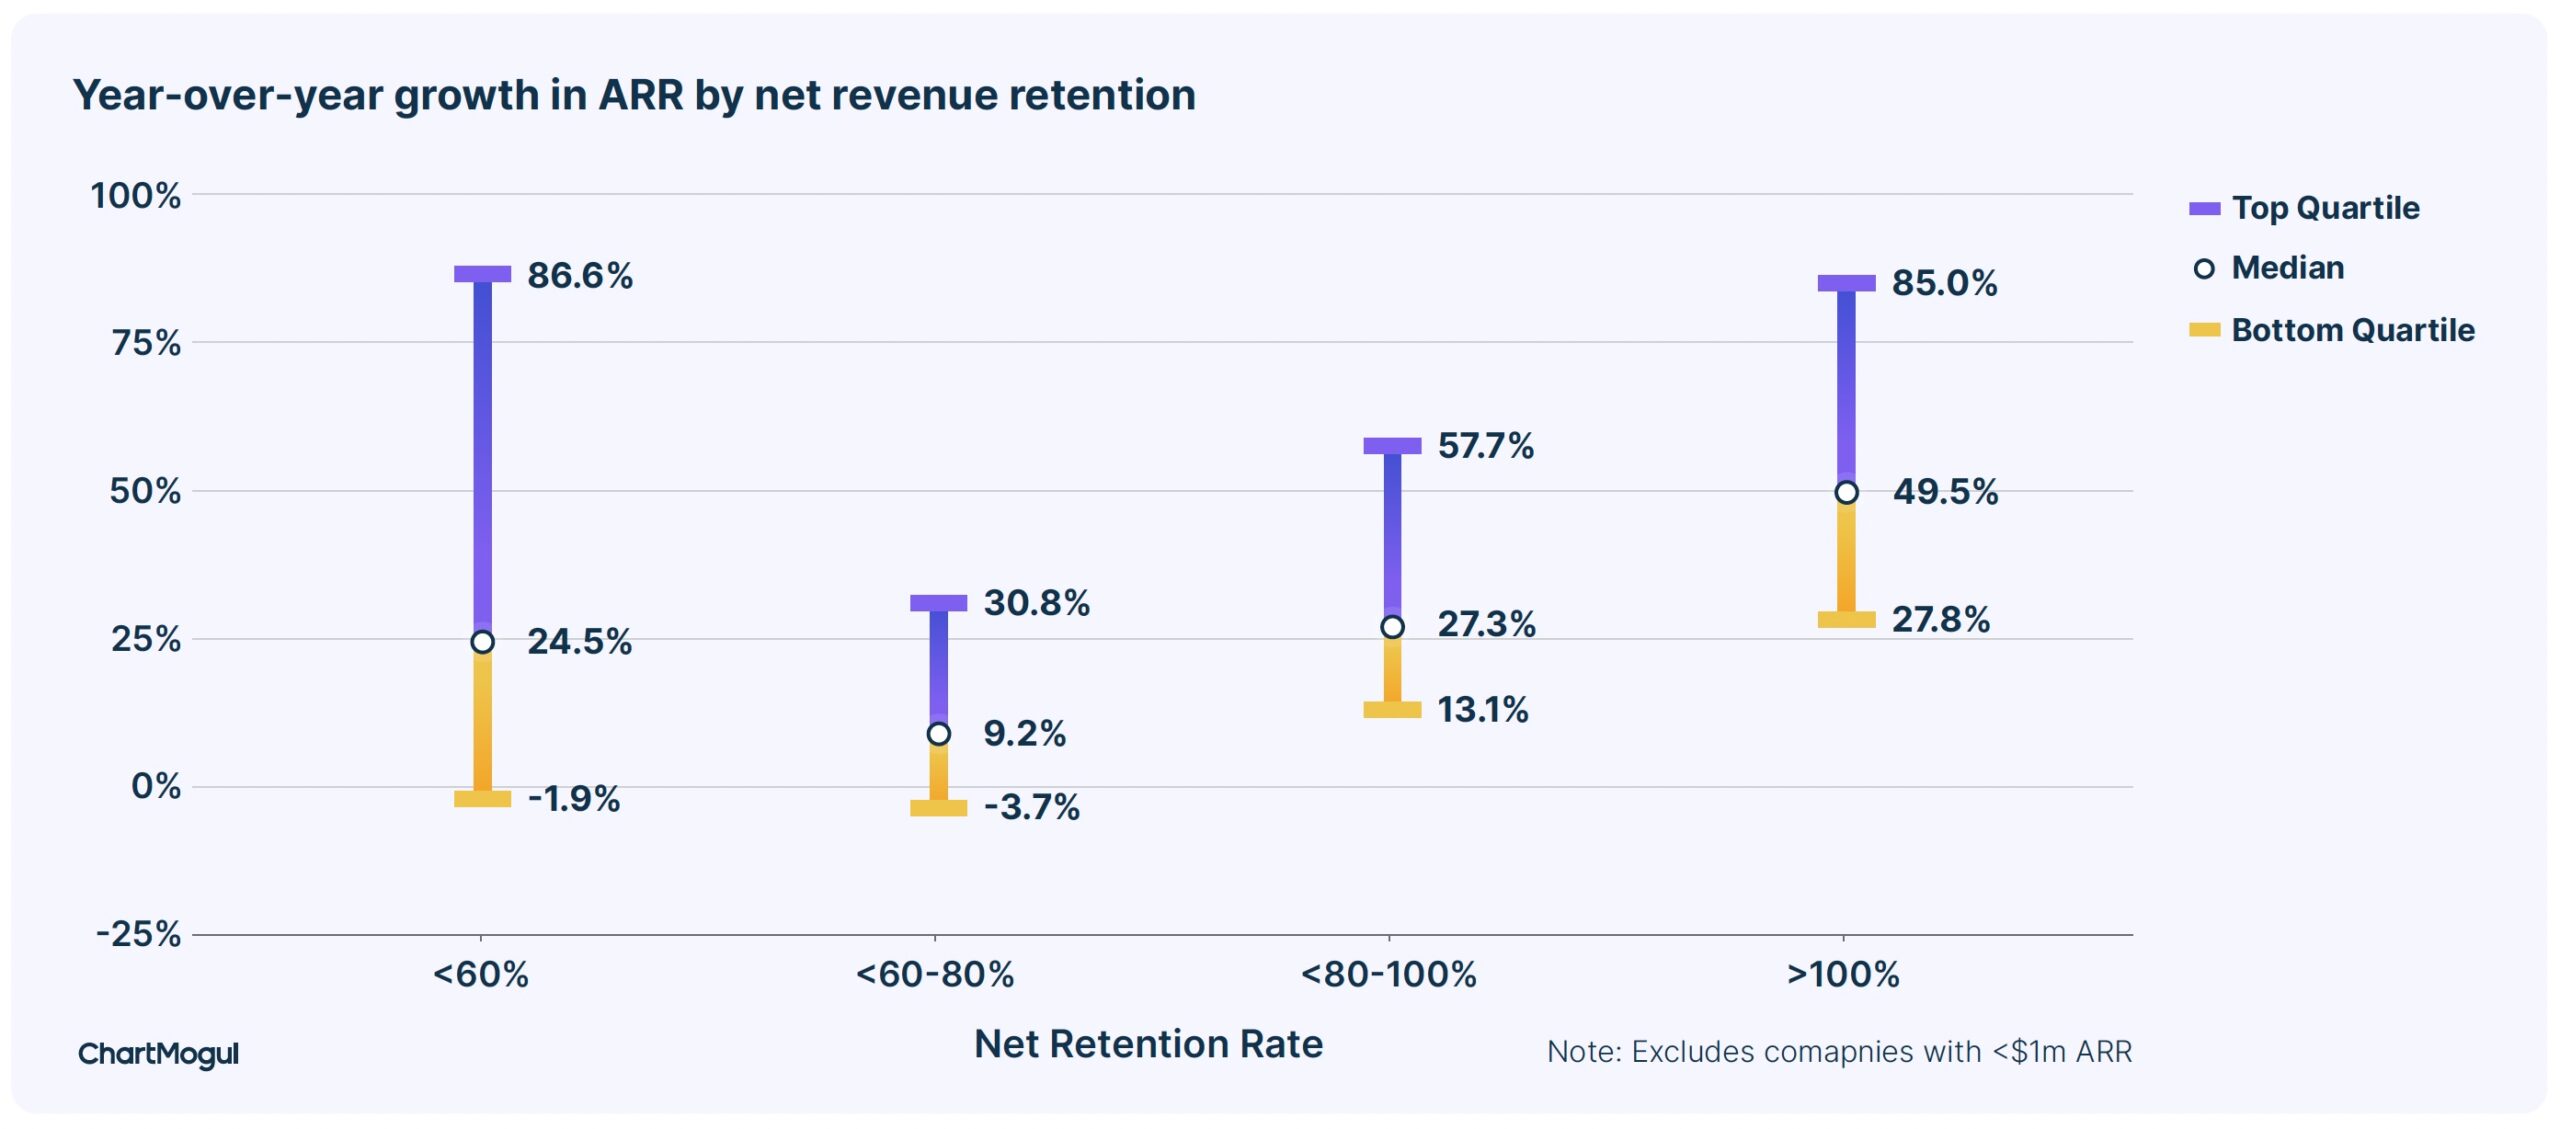 Higher net retention leads to higher growth rates